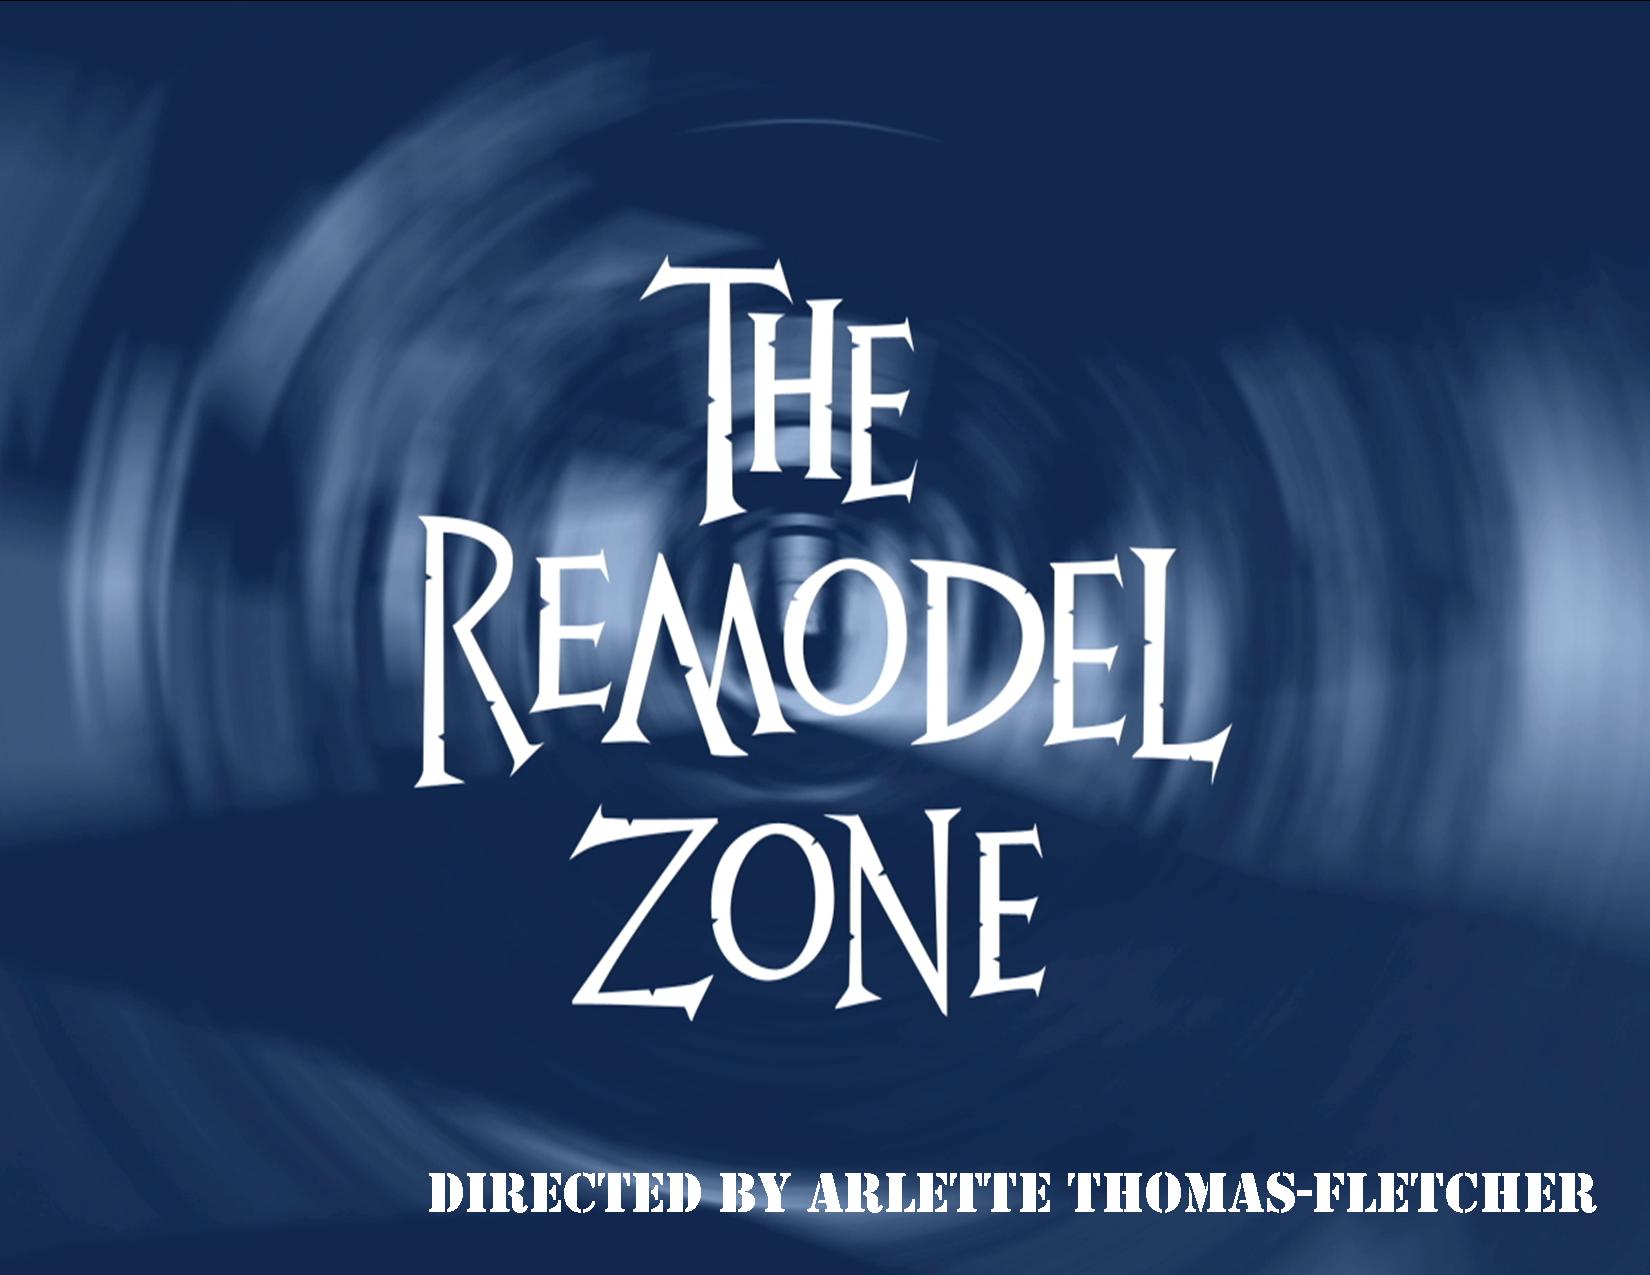 The Remodel Zone documentary